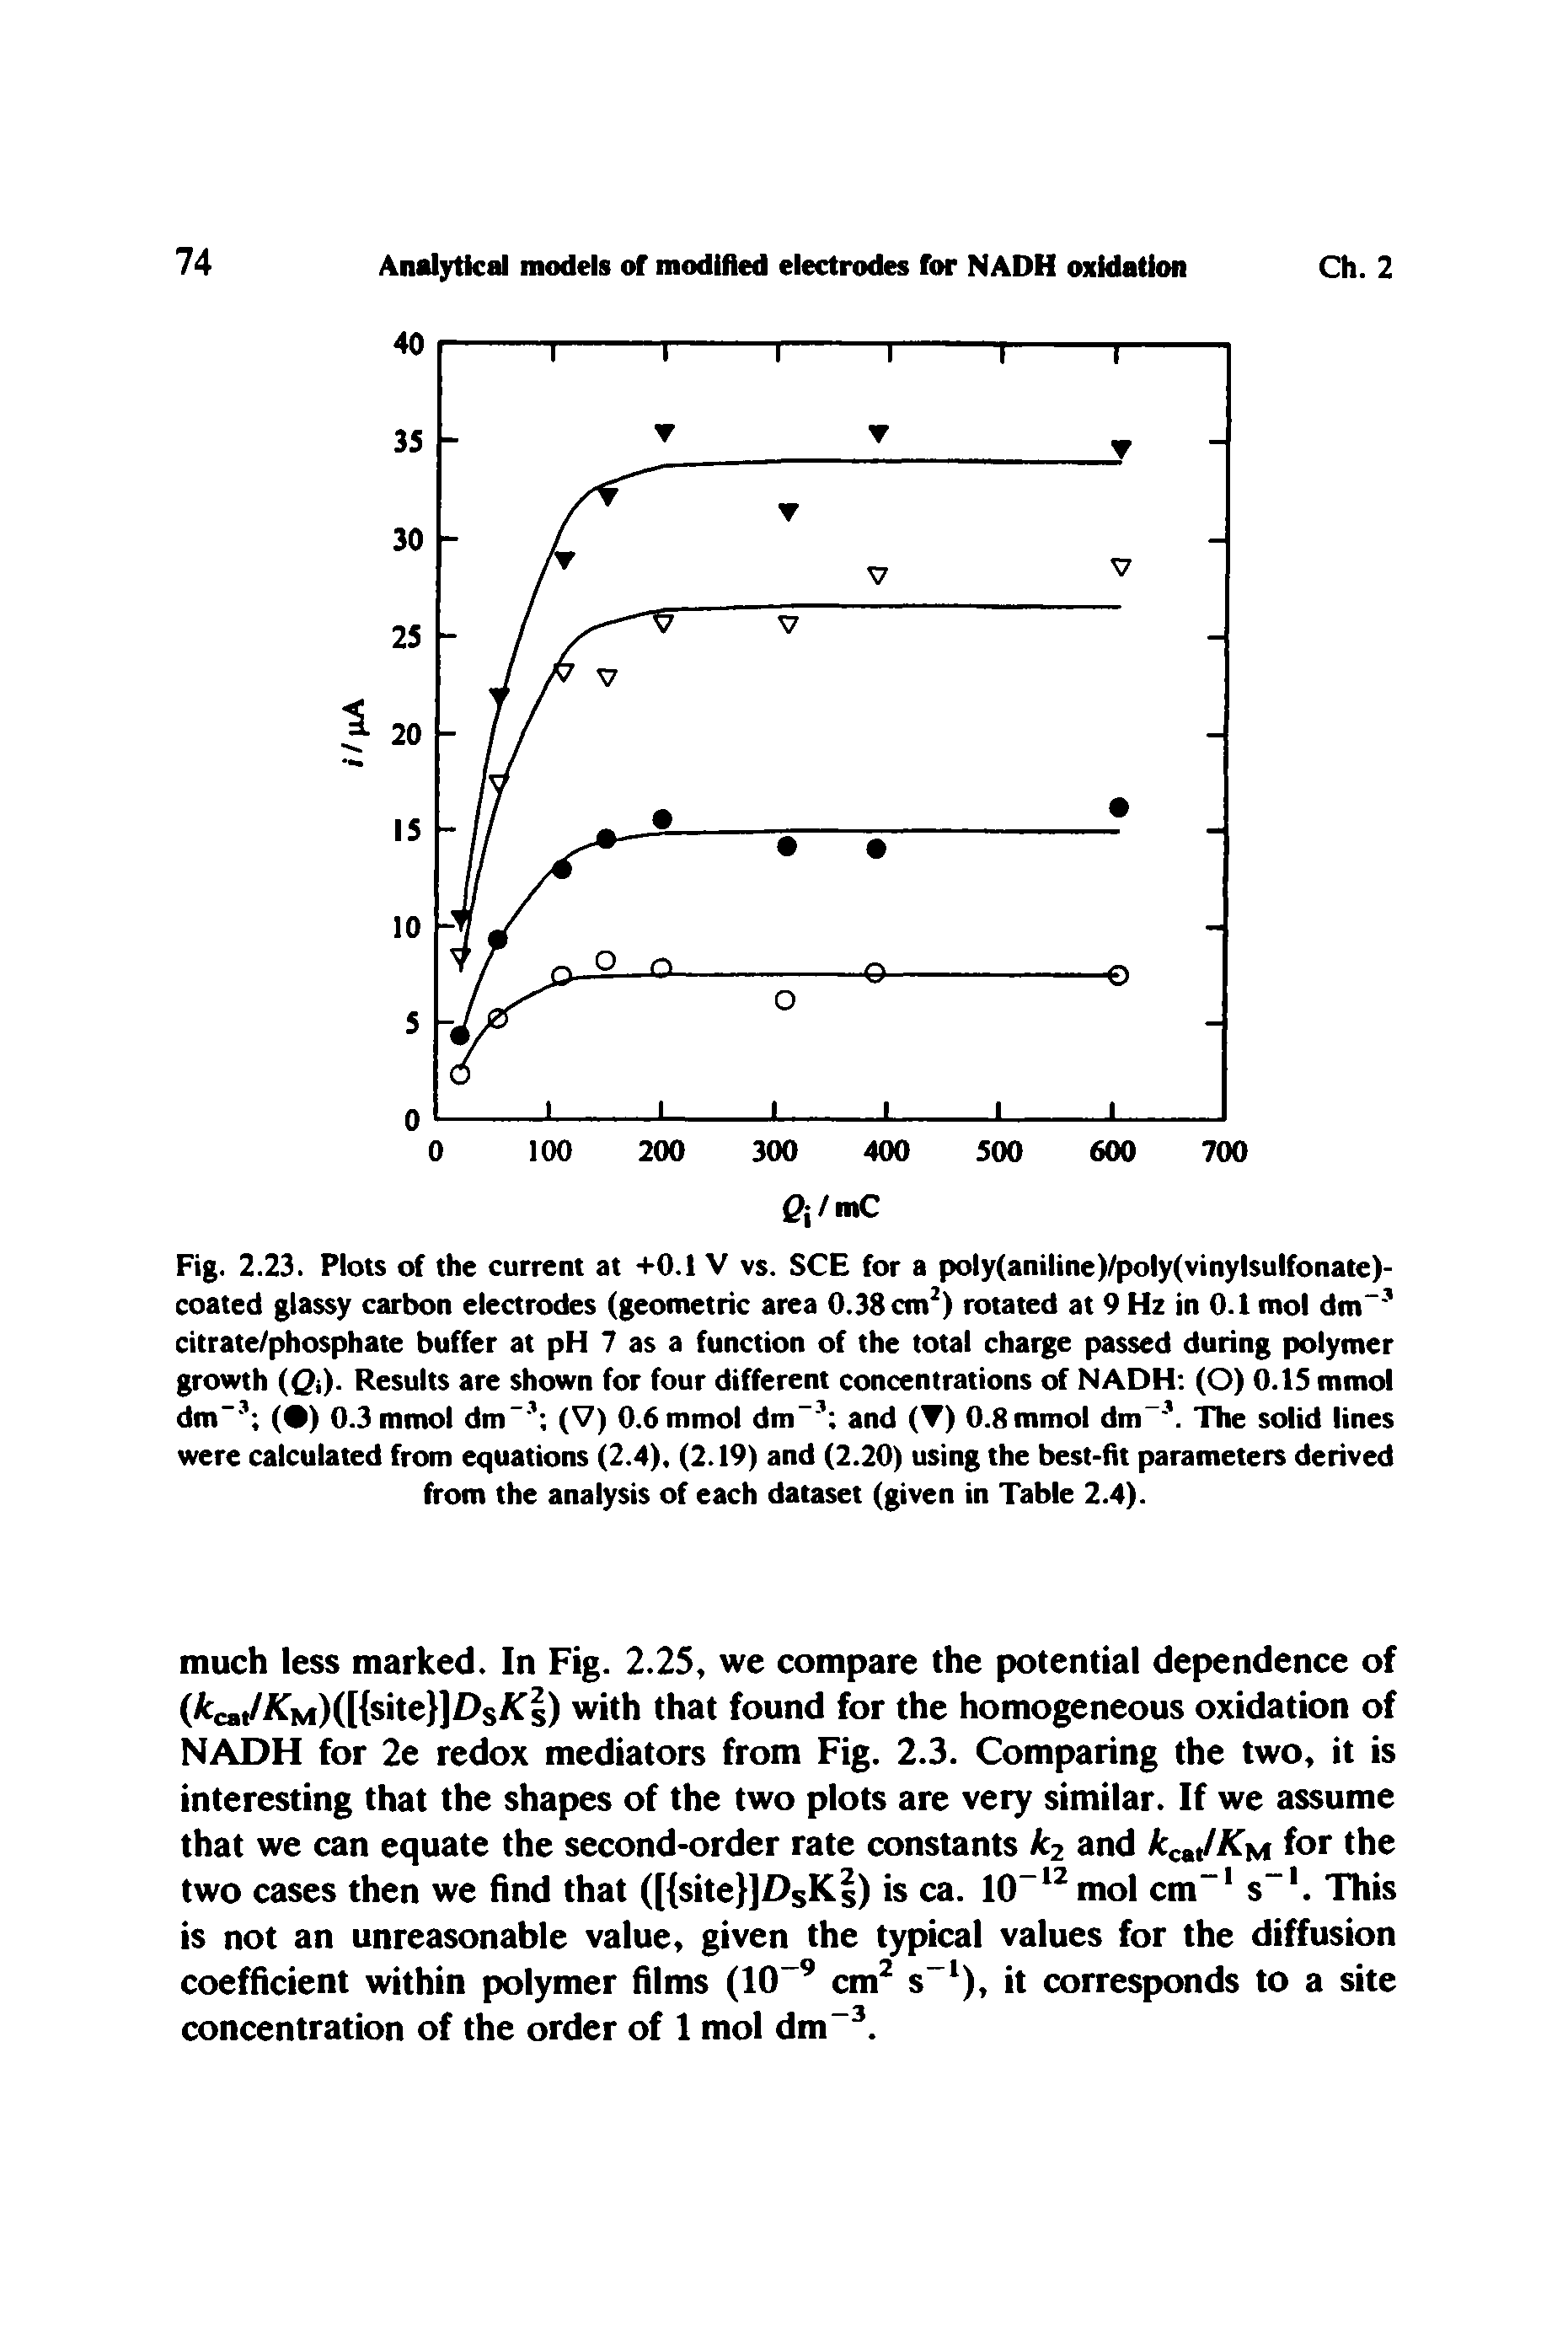 Fig. 2.23. Plots of the current at +0.1 V vs. SCE for a poly(aniline)/poly(vinylsulfonate)-coated glassy carbon electrodes (geometric area 0.38 cm2) rotated at 9 Hz in 0.1 mol dm-3 citrate/phosphate buffer at pH 7 as a function of the total charge passed during polymer growth (Qi). Results are shown for four different concentrations of NADH (O) 0.15 mmol dm- 1 ( ) 0.3 mmol dm-1 (V) 0.6 mmol dm-1 and ( ) 0.8 mmol dm-1. The solid lines were calculated from equations (2.4), (2.19) and (2.20) using the best-fit parameters derived from the analysis of each dataset (given in Table 2.4).